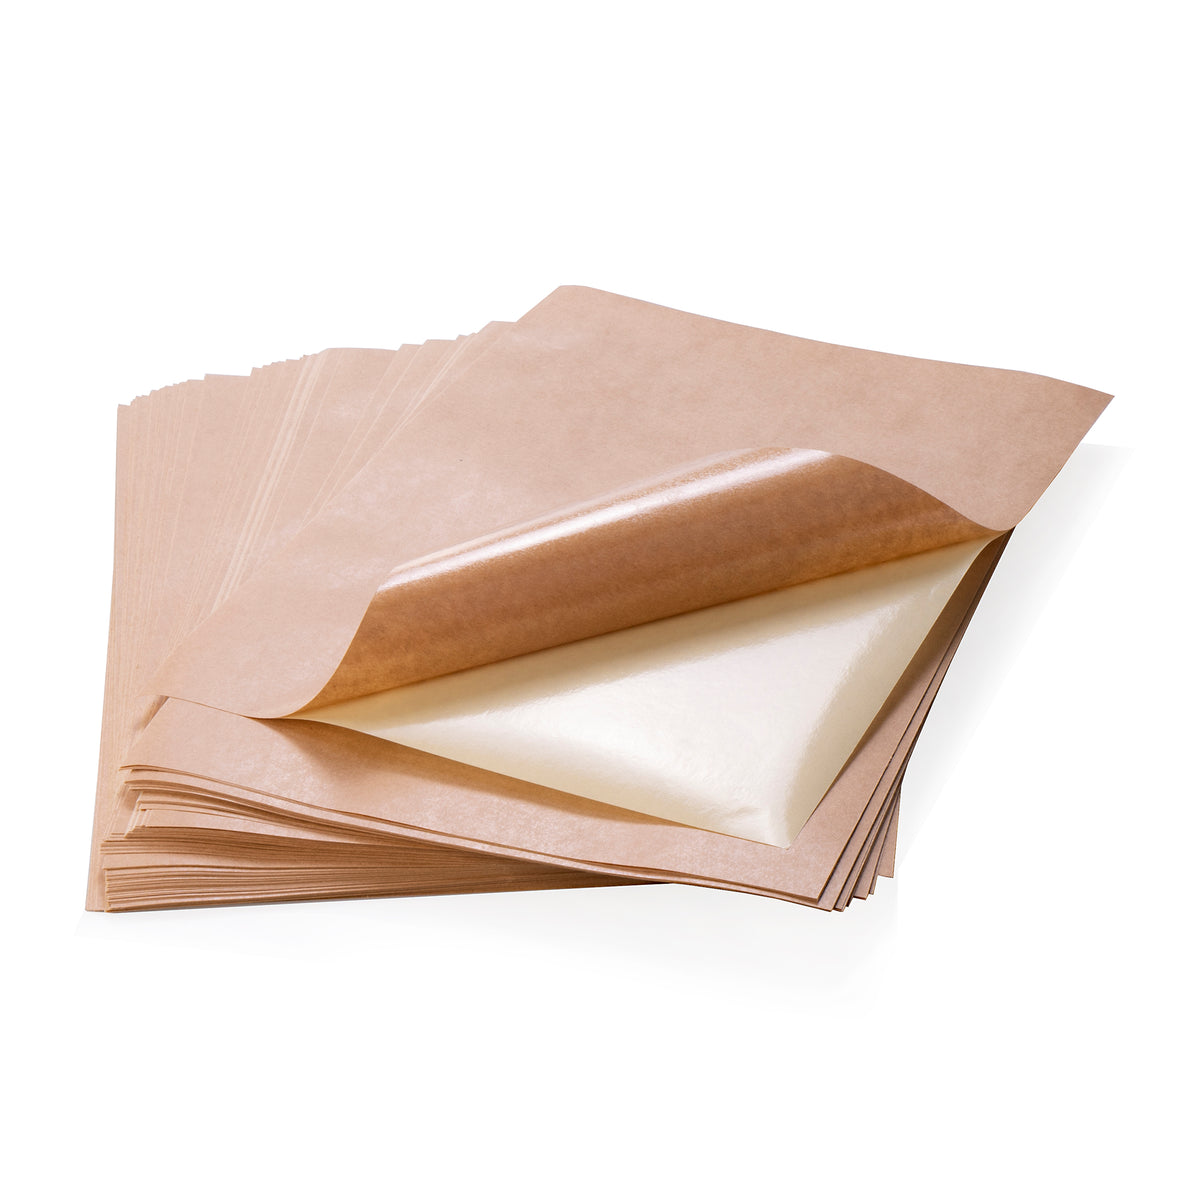 Self-adhesive kraft paper A4 210x297mm 100 sheets smooth paper